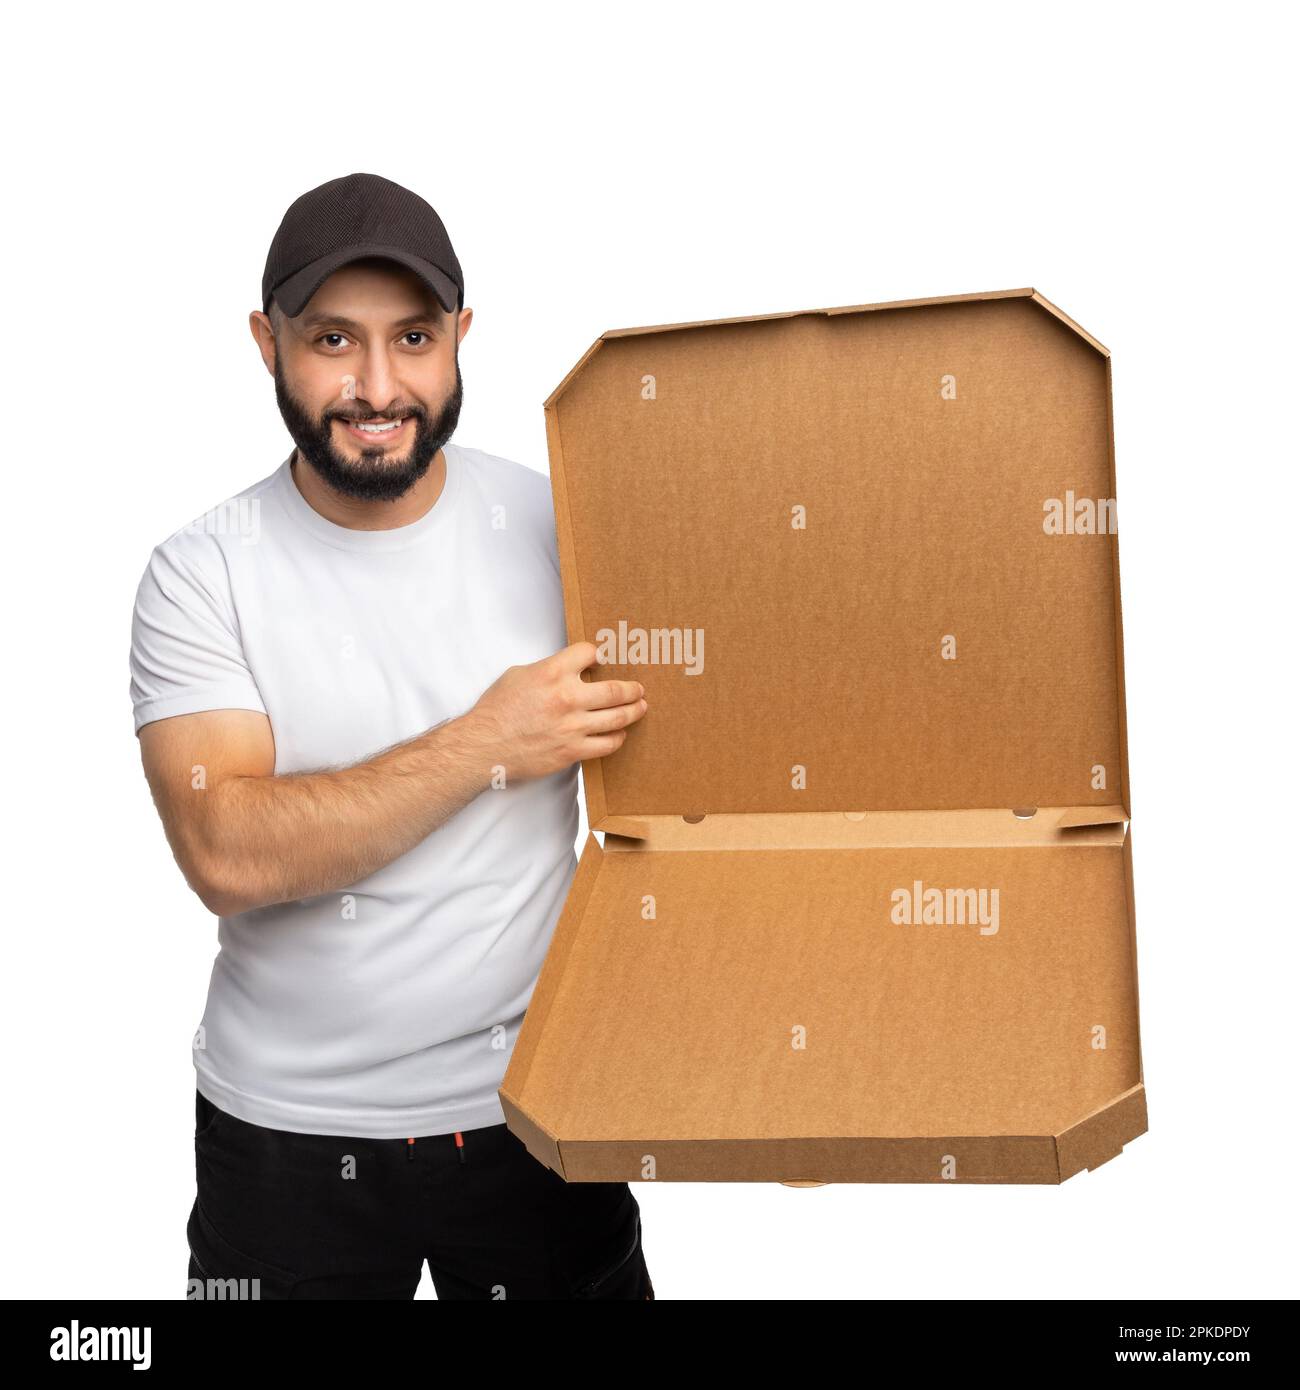 Hot Fresh Pizza In Open Box Stock Photo - Download Image Now